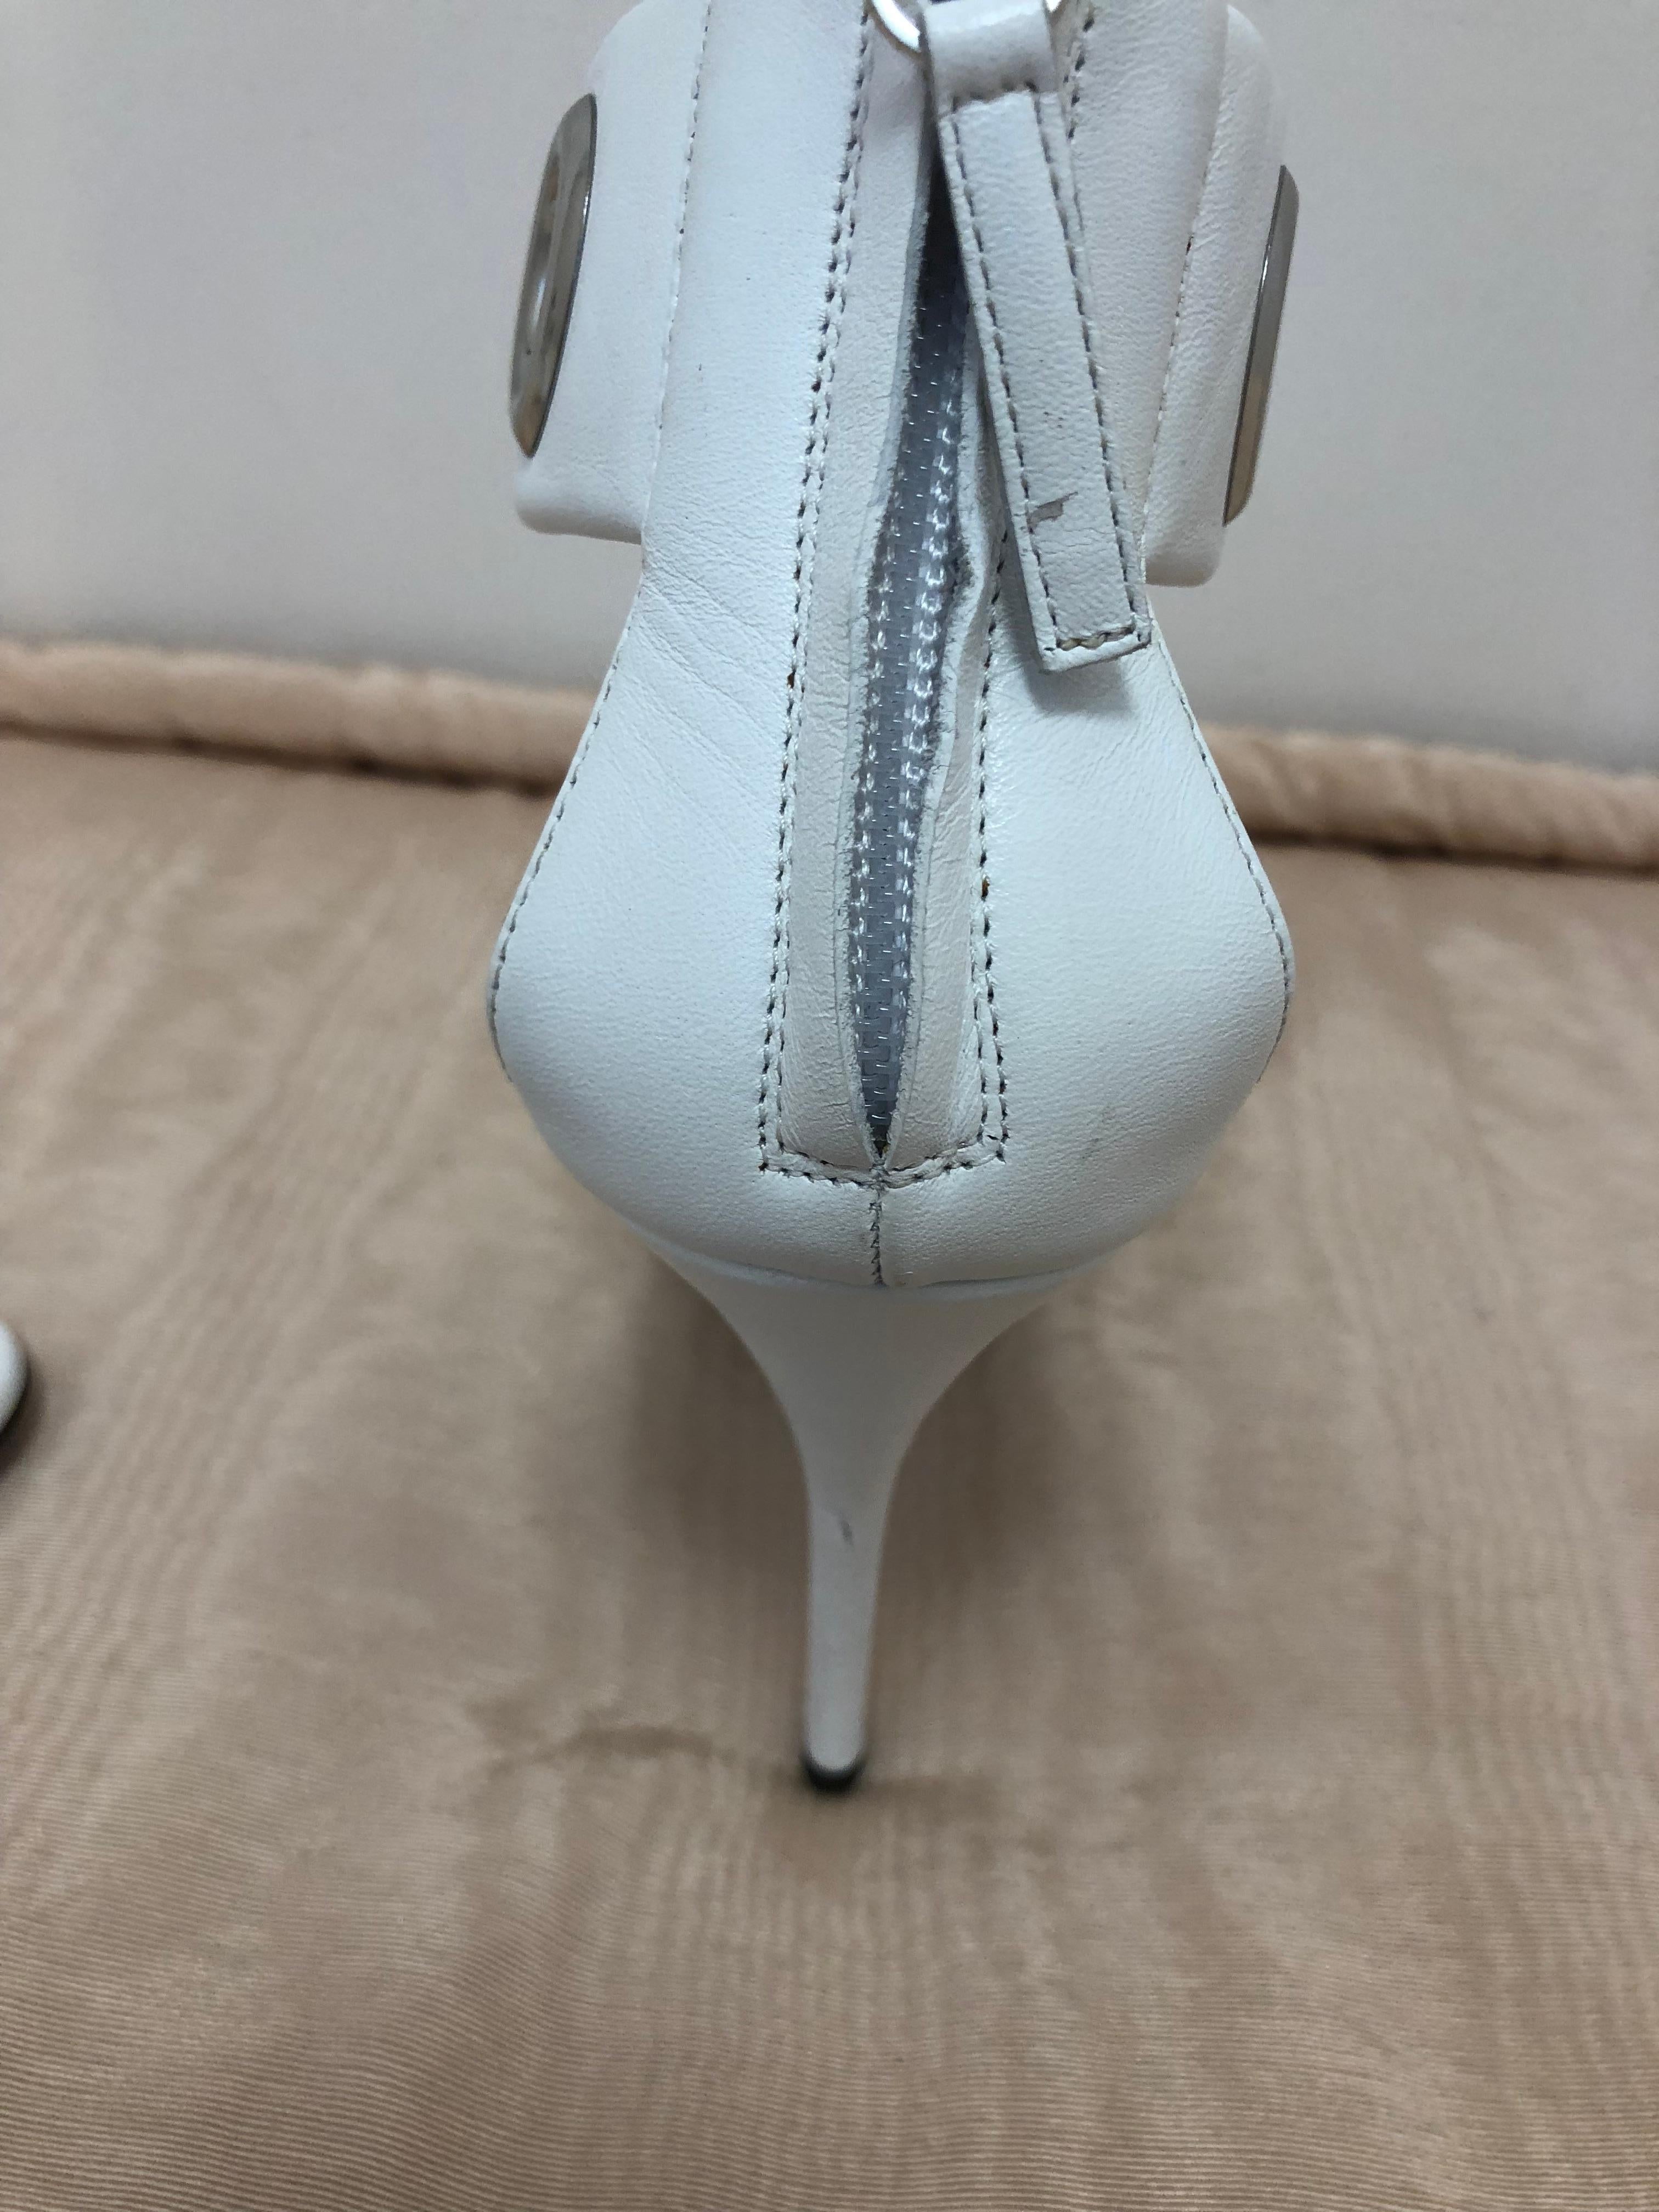 Giuseppe Zanotti White Grommet Stiletto Sandals 37.5 In Excellent Condition For Sale In Port Hope, ON